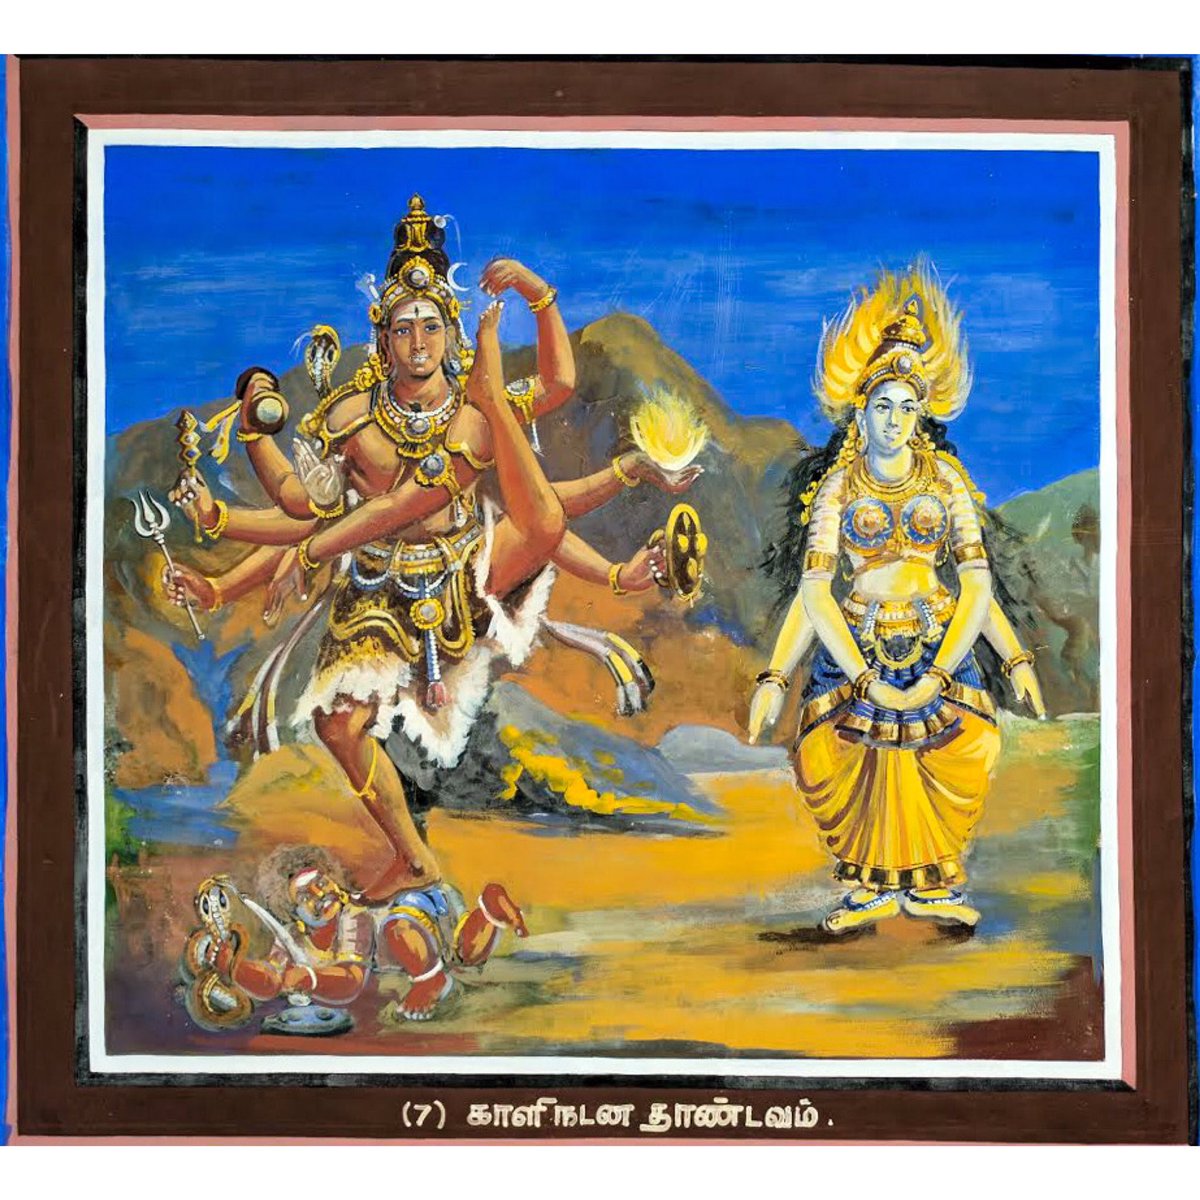 ऊ is for ऊर्ध्वतांडव मूर्ति or Urdhvatandava murtiFinally, Shiva performed the urdhva-janu pose, one that Tillai Amman could not as she was conscious of her modesty. Tillai Amman conceded defeat and Shiva became the presiding deity of Chidambaram. #AksharArt  #ArtByTheLetter